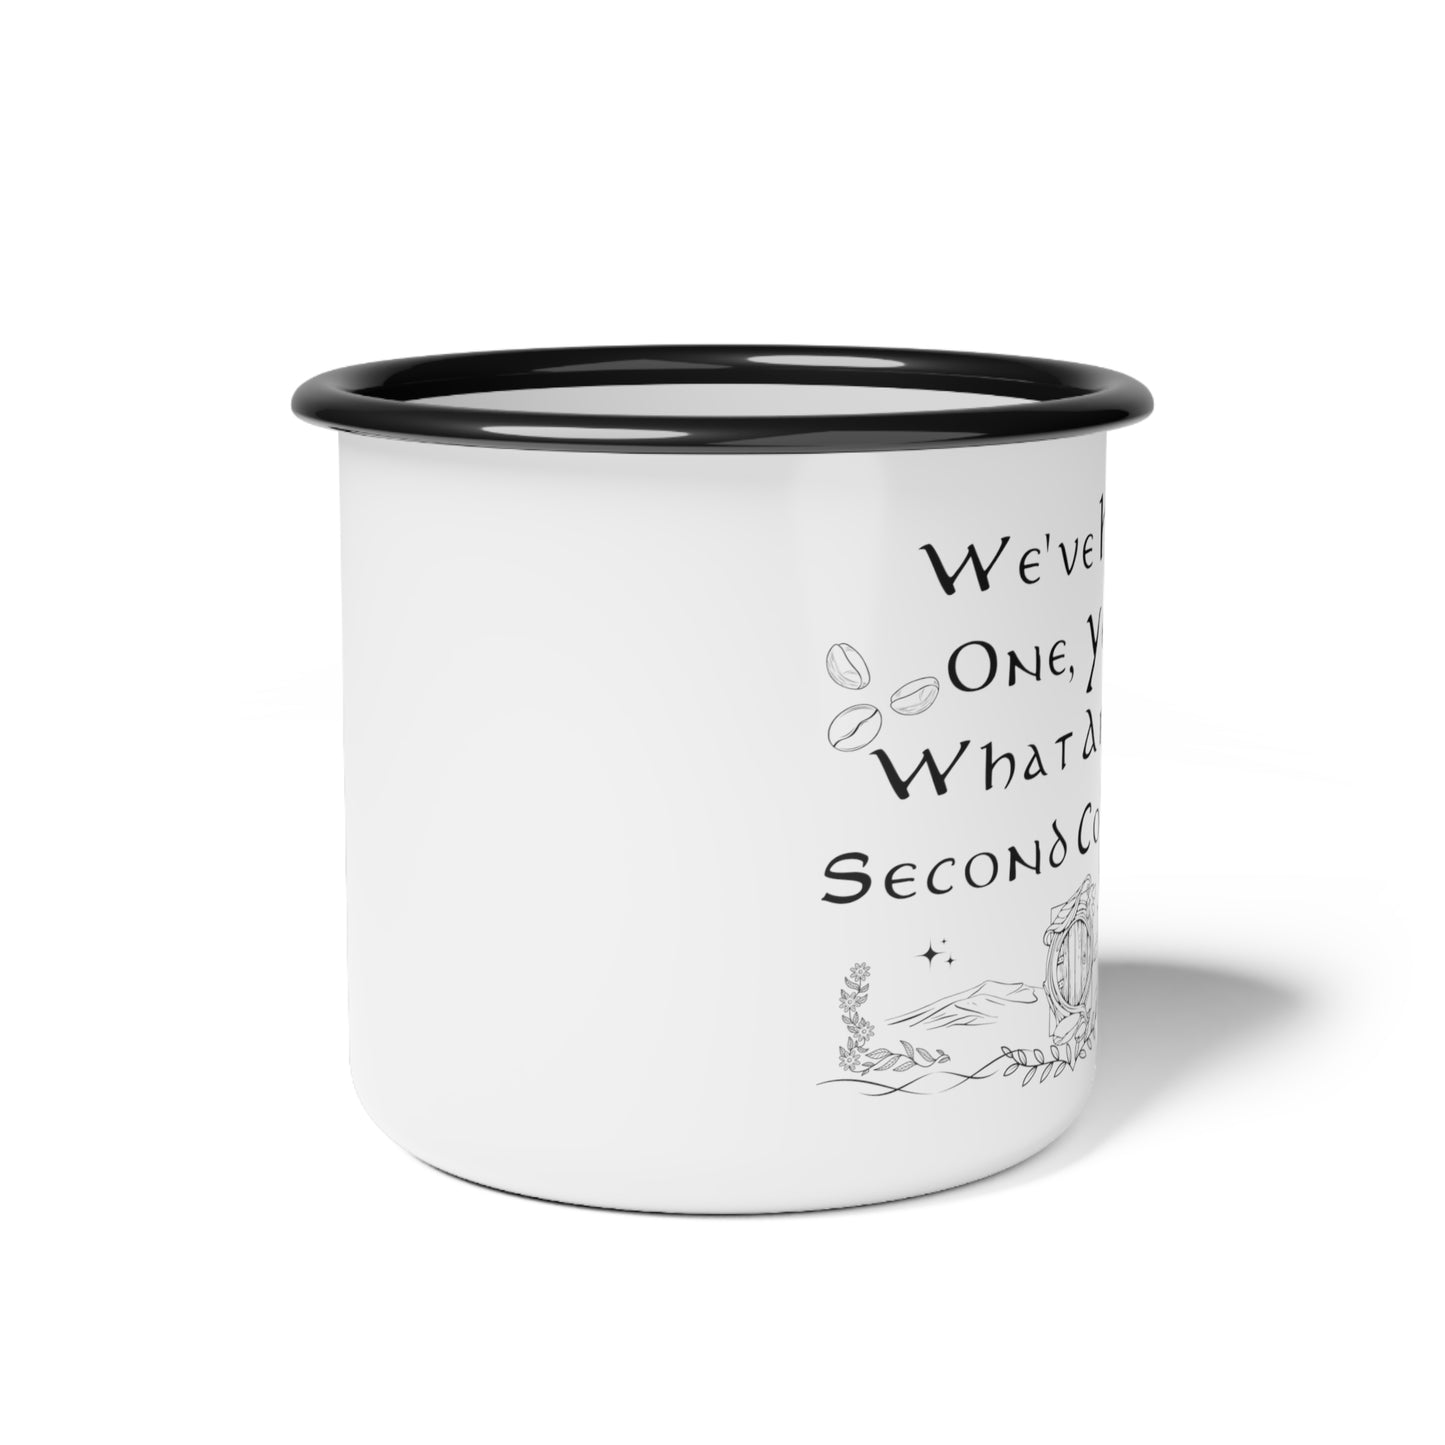 "WE HAVE ONE, YES. WHAT ABOUT SECOND COFFEE?" 12oz mug for those shire folk